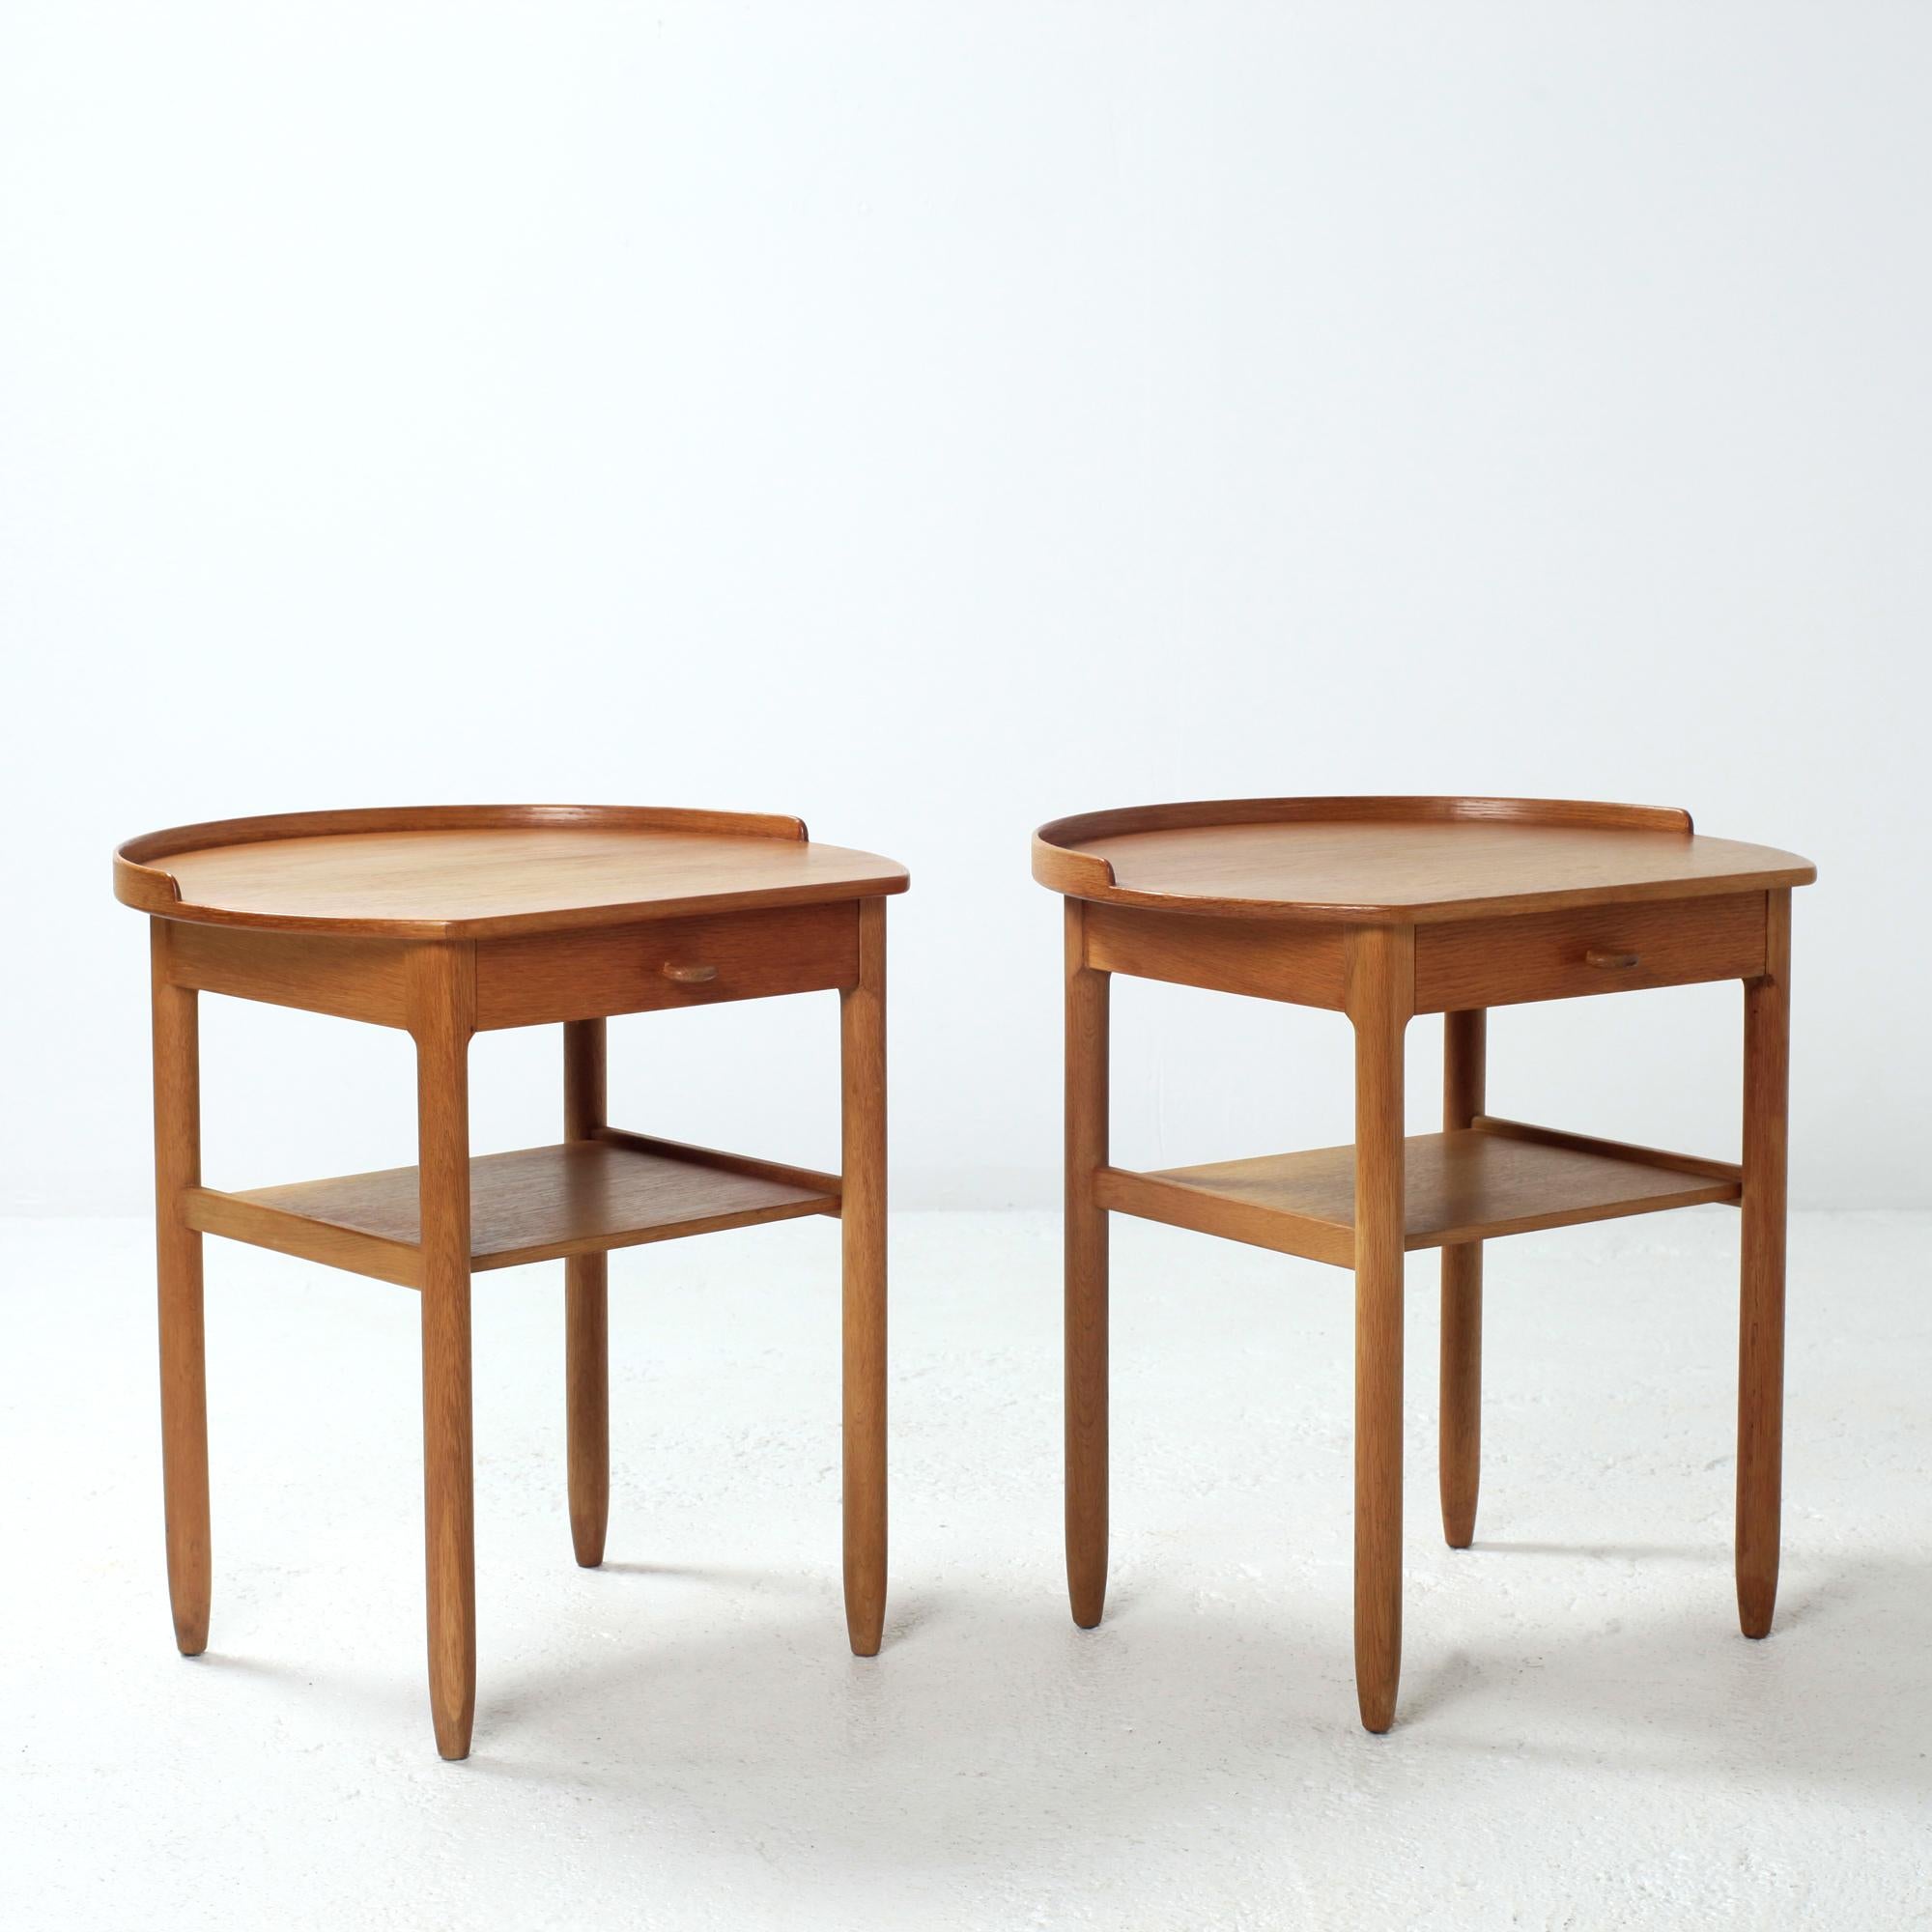 Swedish Pair of Bedside Tables by Sven Engström and Gunnar Myrstrand for Bodafors 1960's